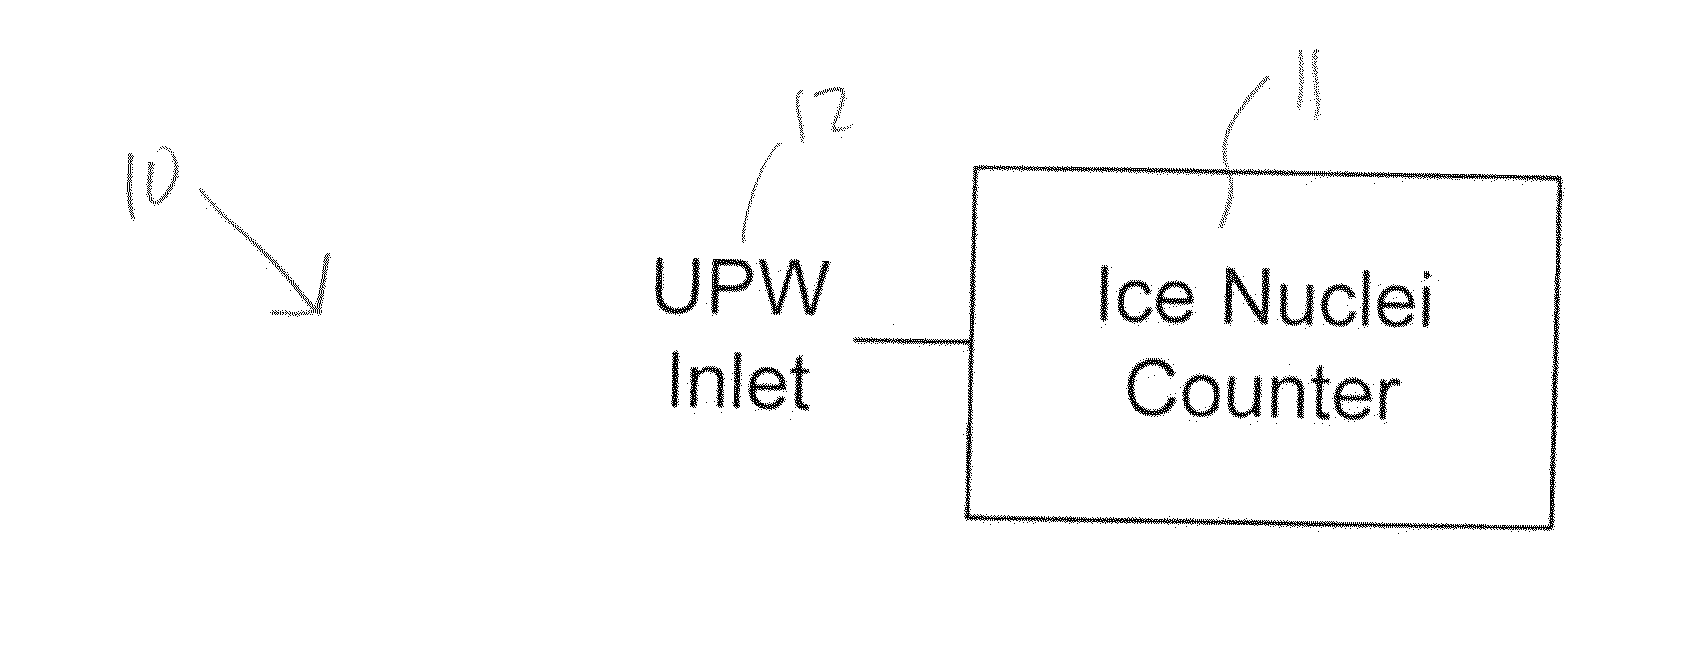 Ice nucleii counter technology